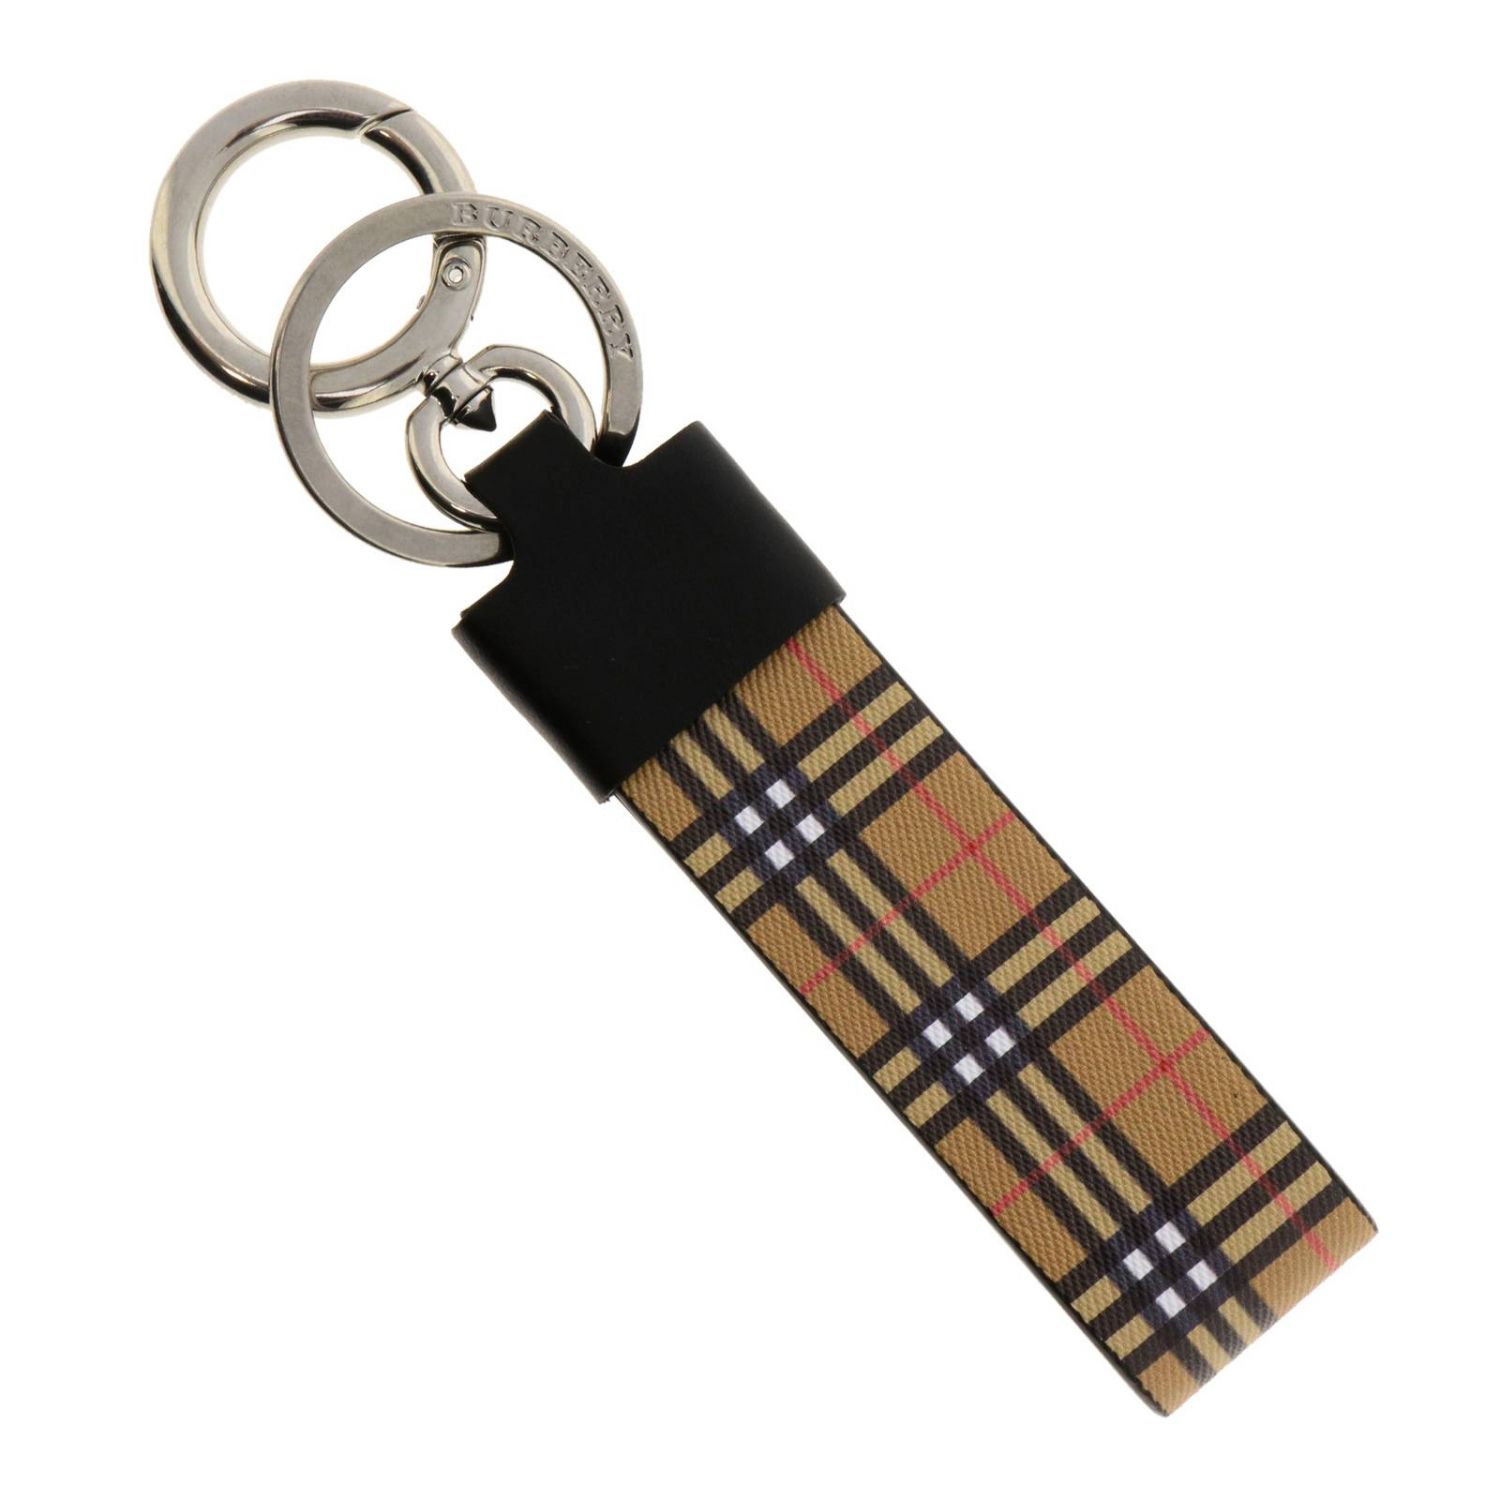 Keyring Burberry Top Sellers, SAVE 53% 